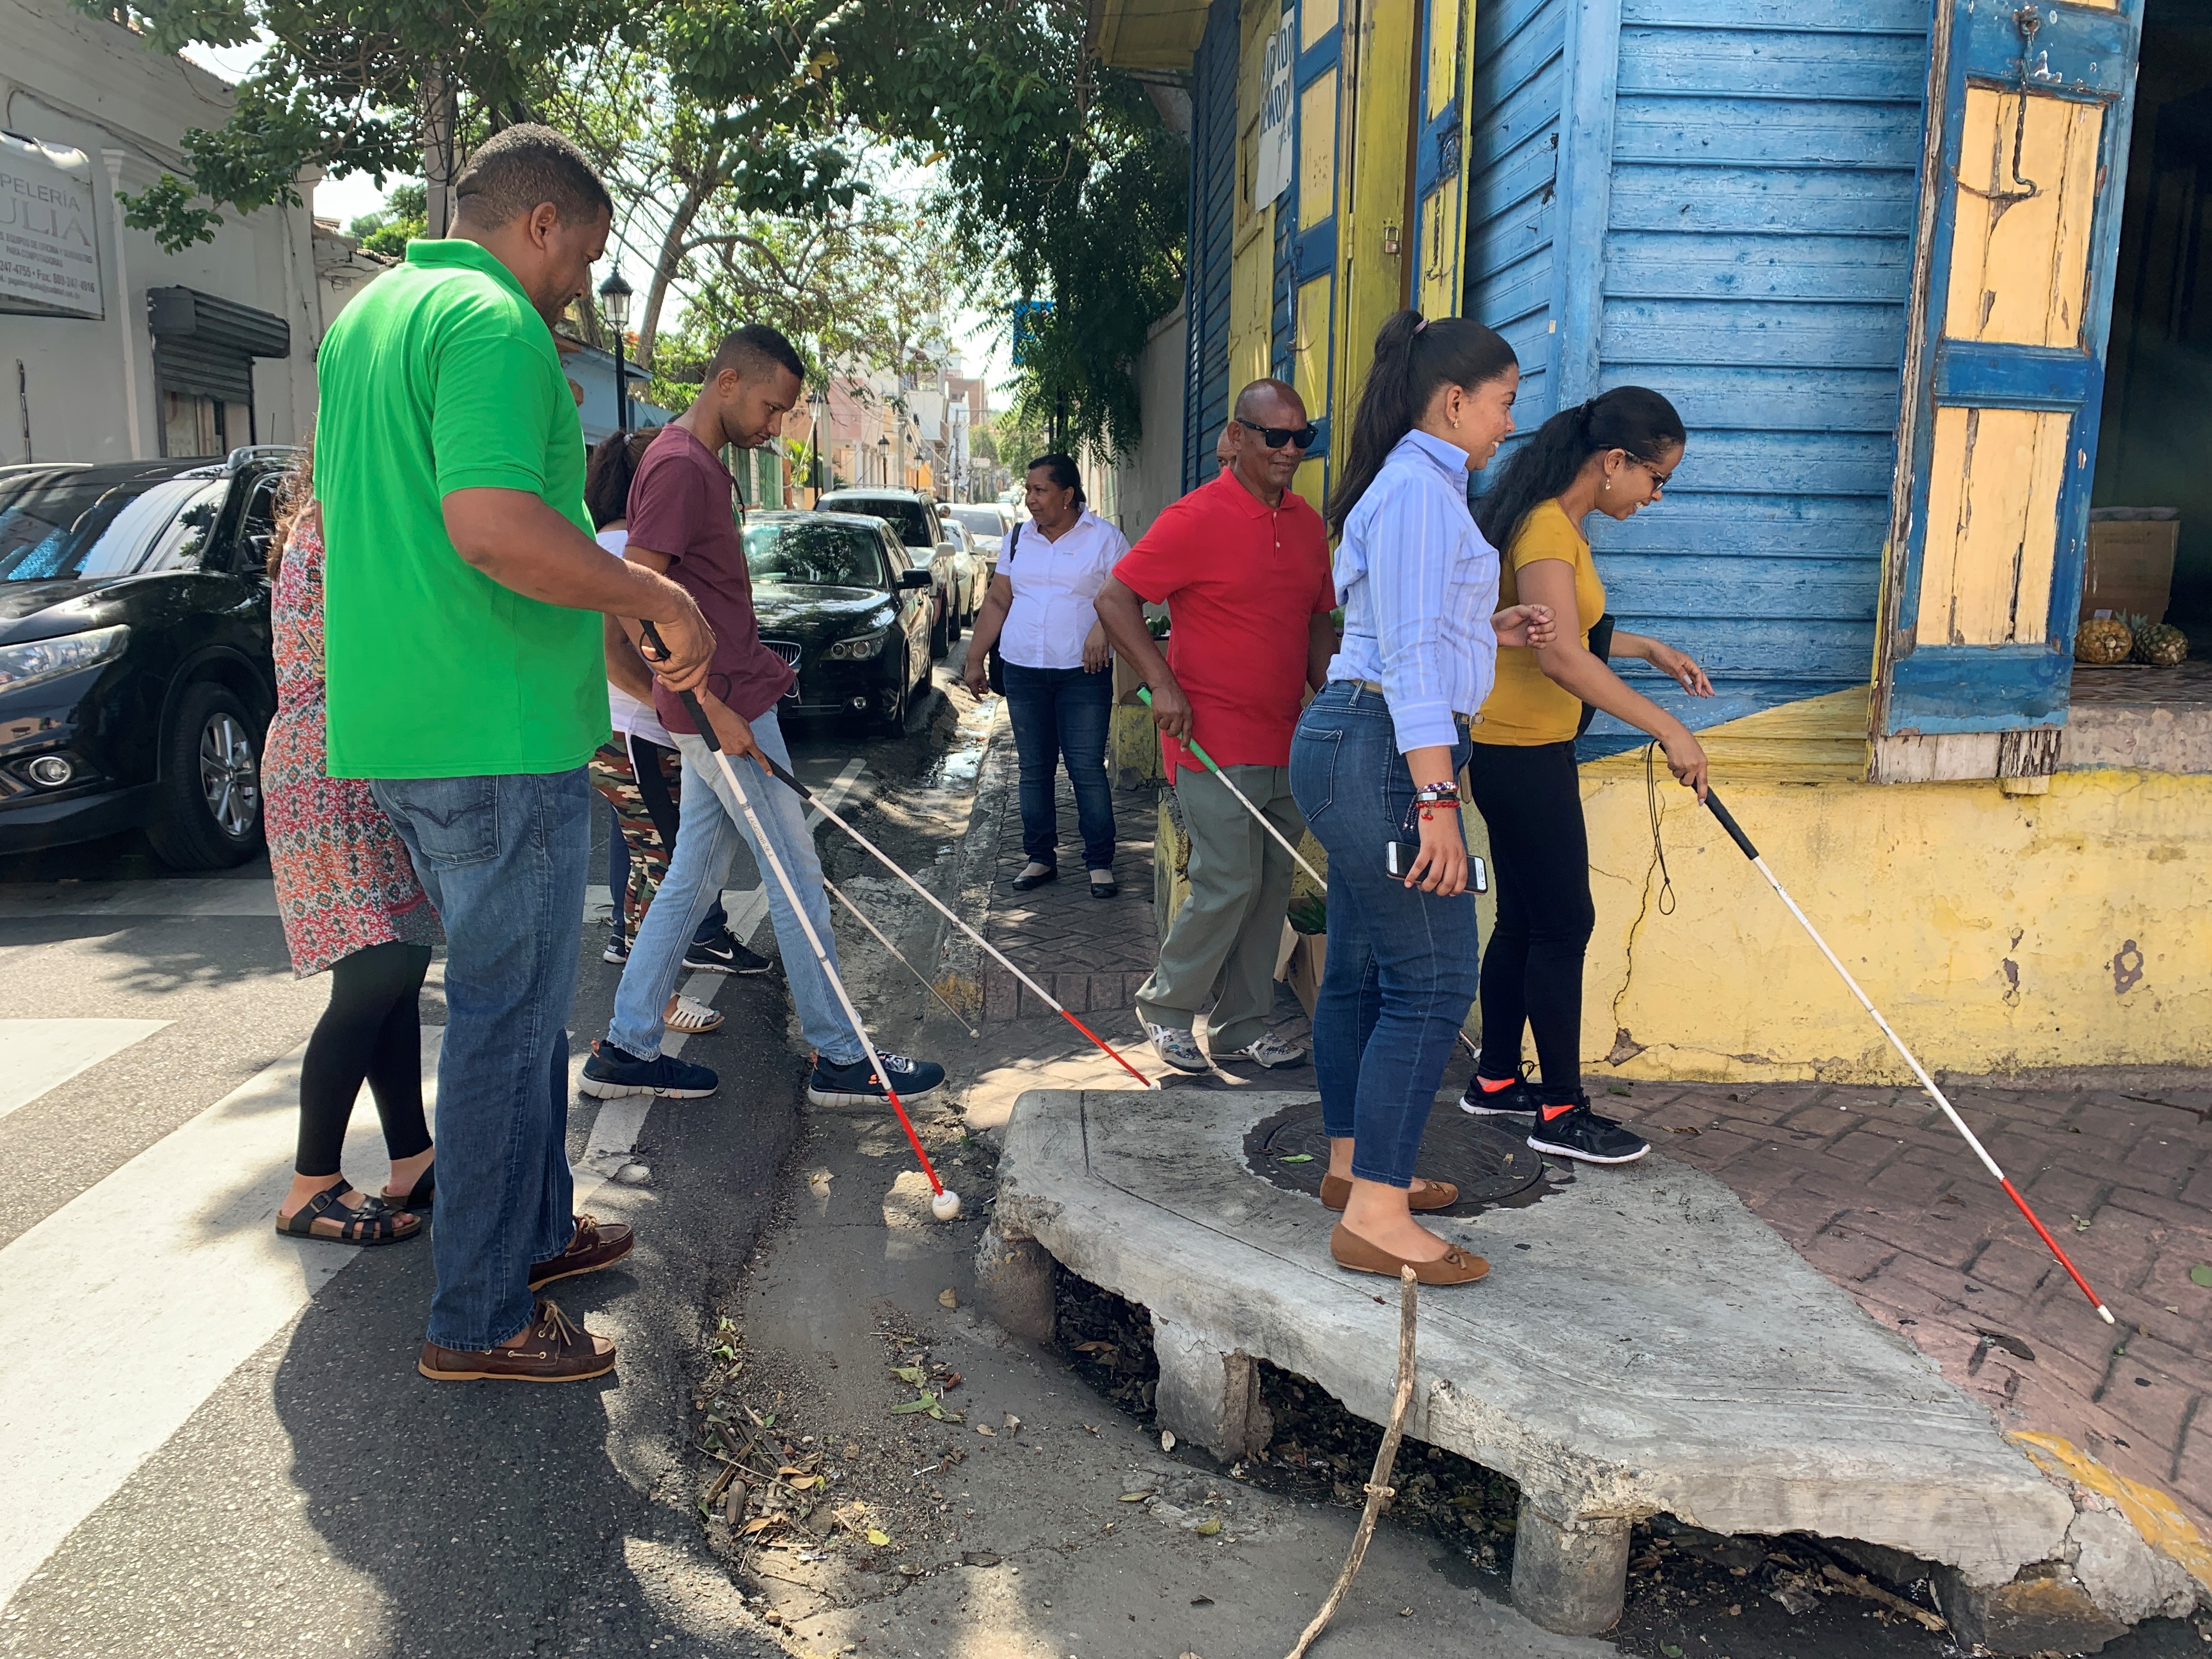 Volunteers with visual disabilities evaluate a neighborhood where a school for the blind is located to identify transportation accessibility challenges. (Natalia Coachman/IDB)